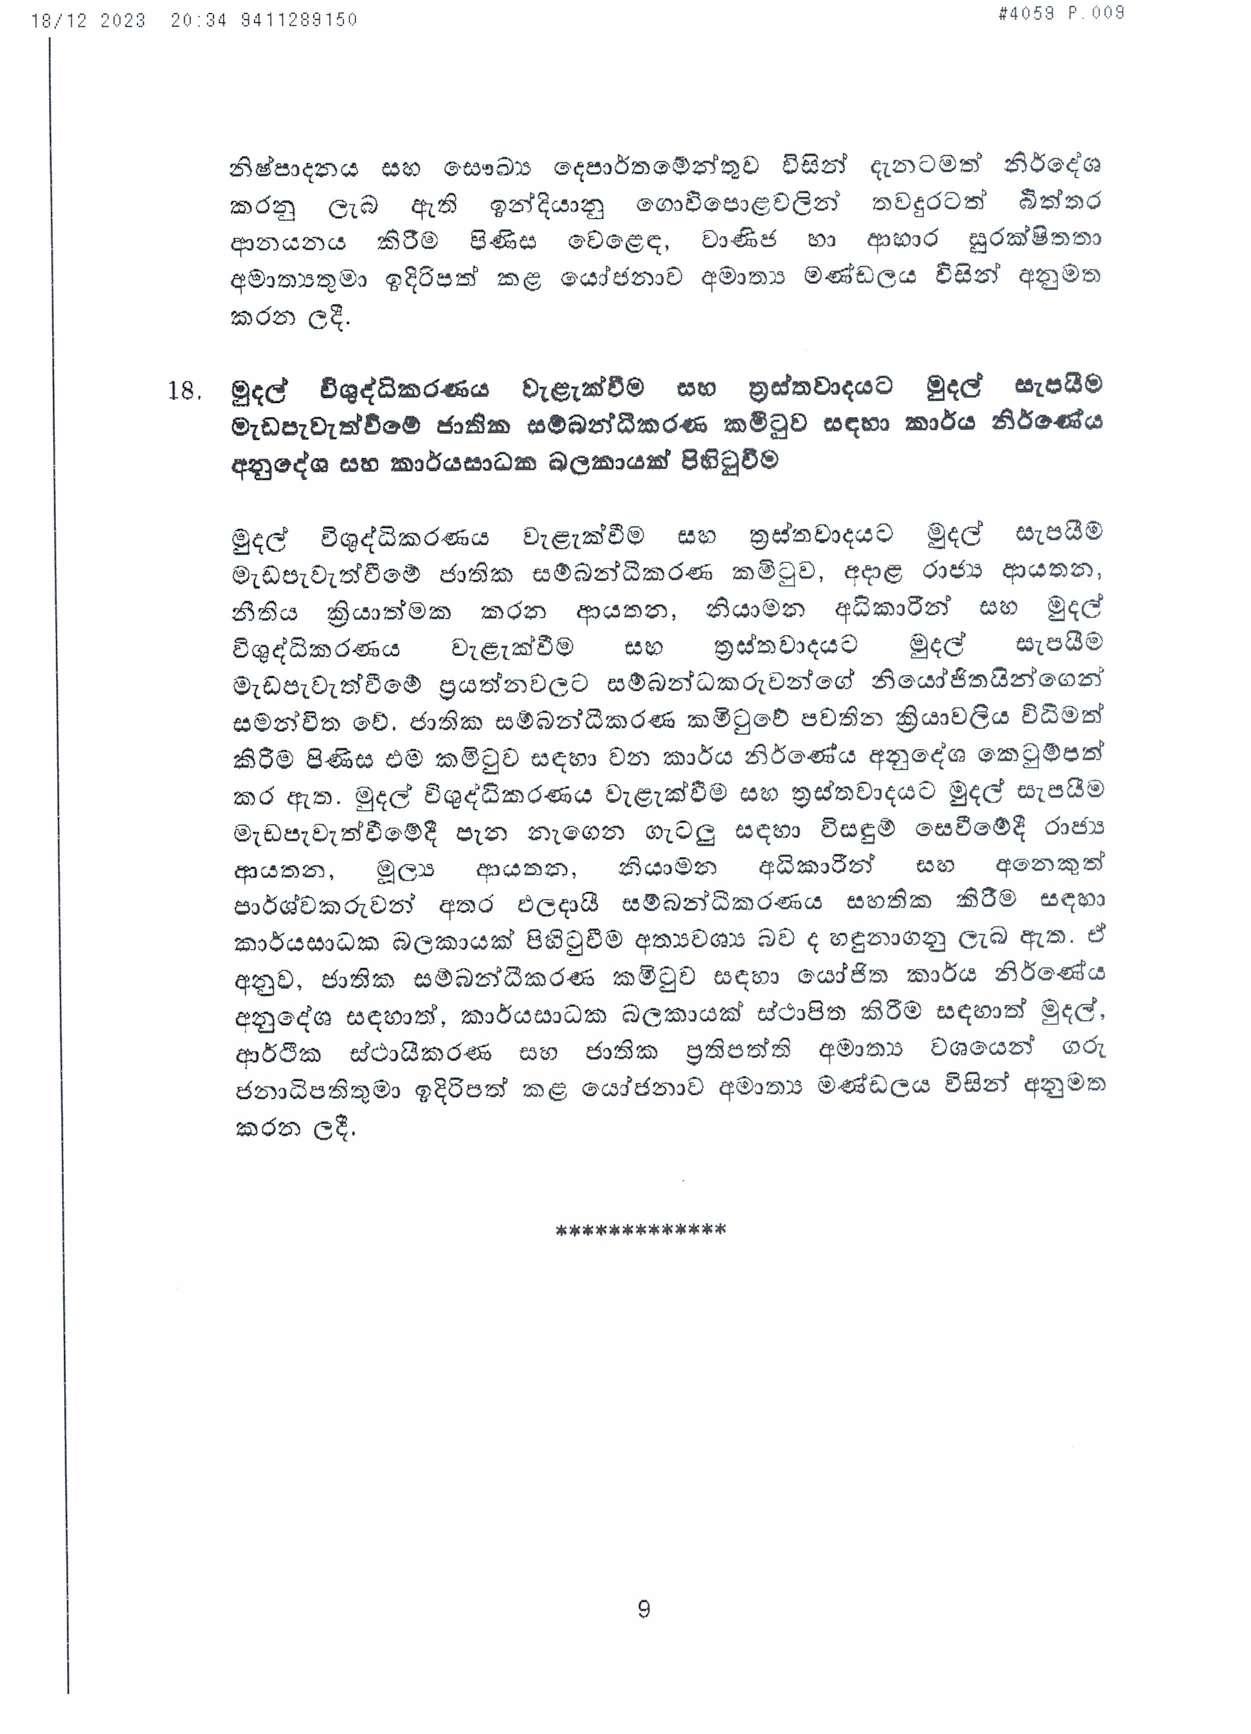 Cabinet Decision on 18.12.2023 page 009